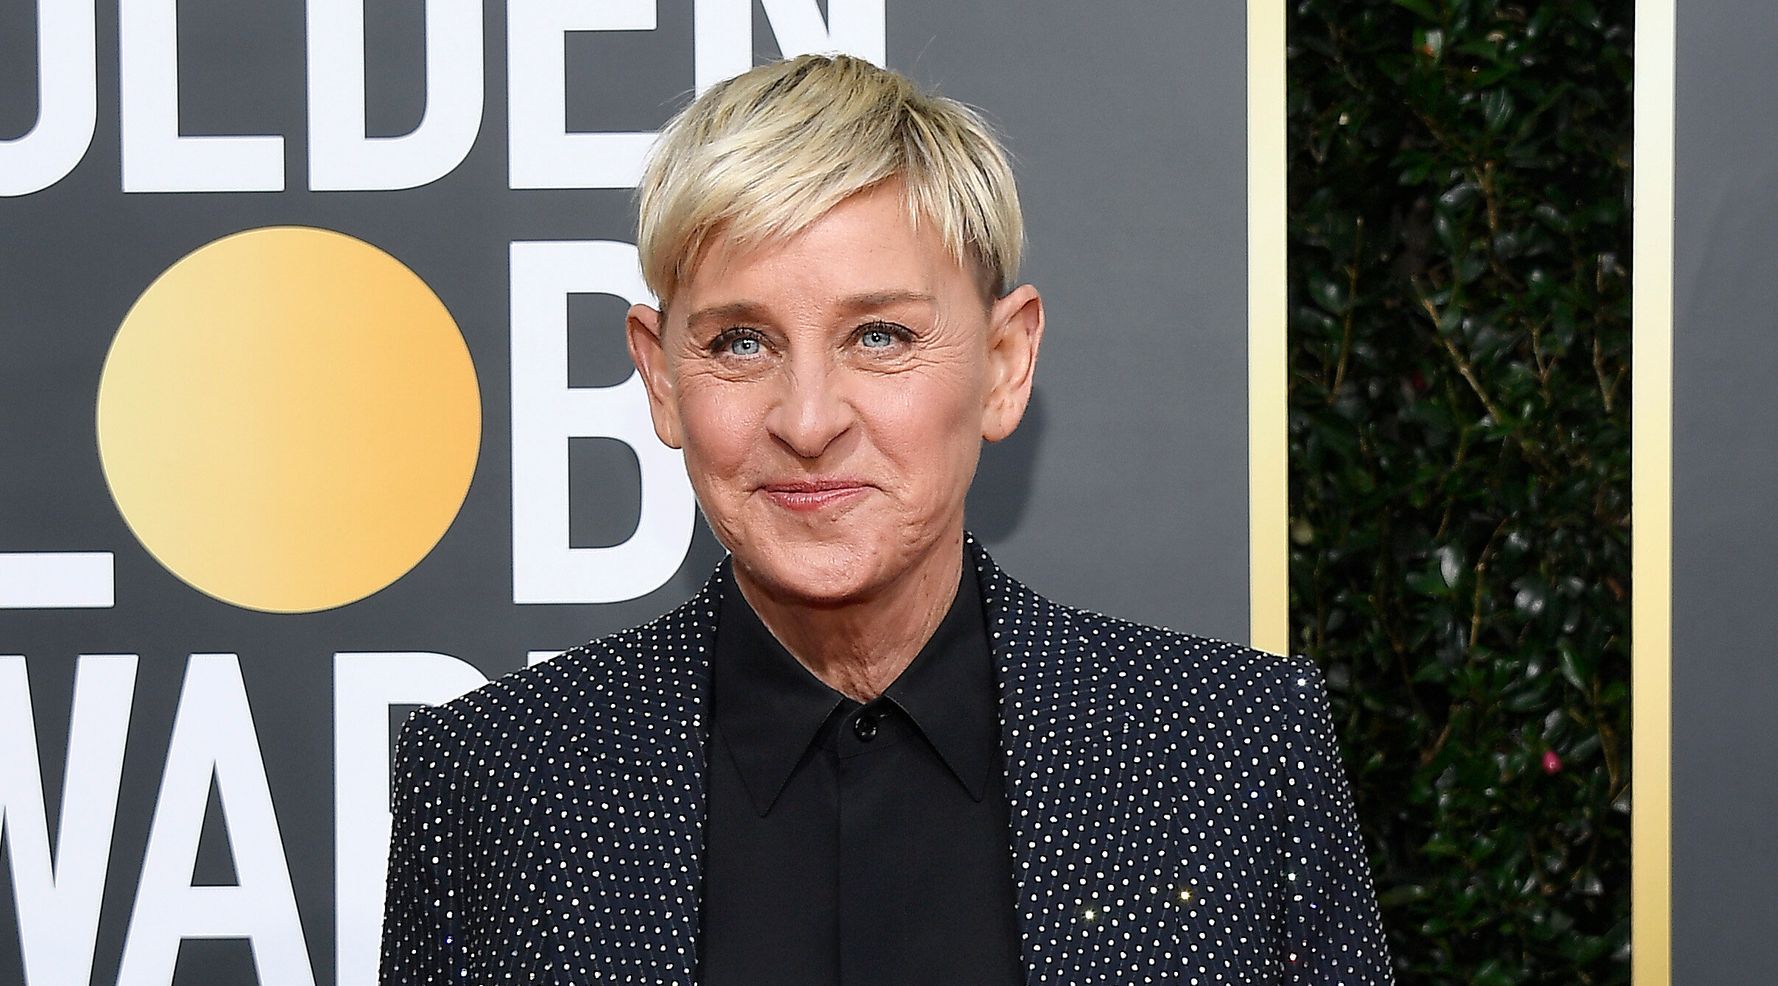 Ellen DeGeneres has lost more than 1 million viewers since apologizing for the toxic workplace